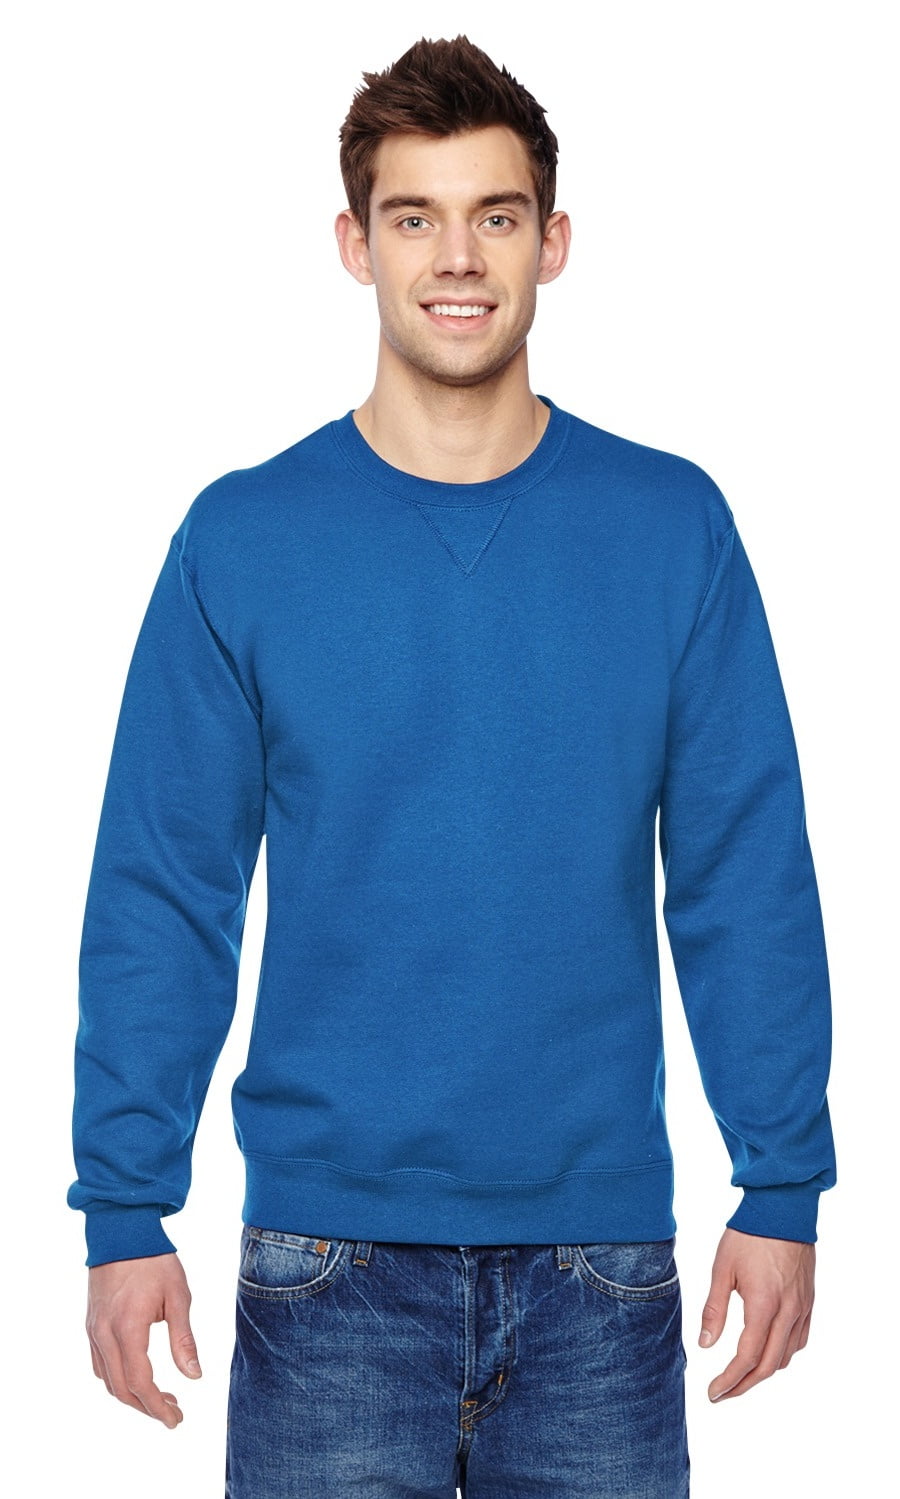 Fruit of the Loom - The Fruit of the Loom Adult 72 oz Sofspun Crewneck ...